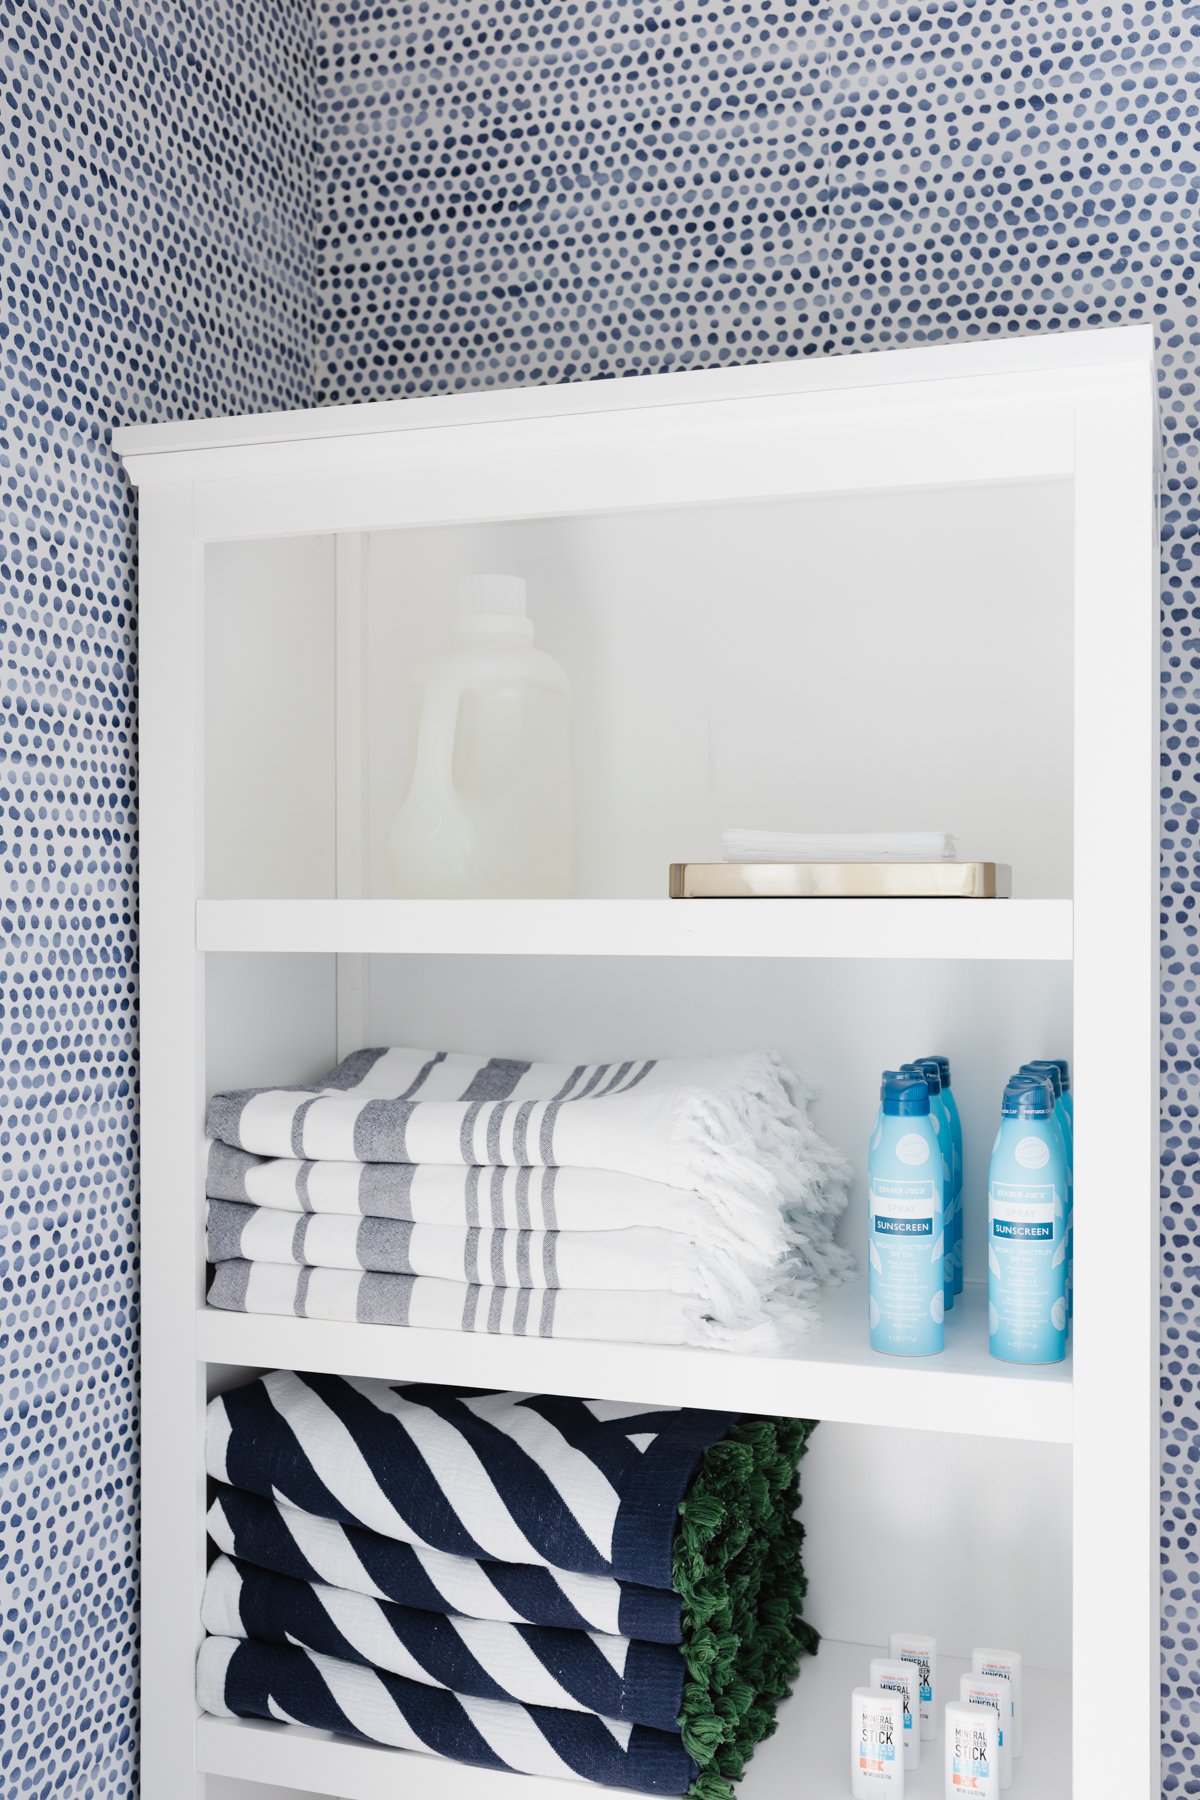 A clean and minimalist white shelf adorned with soft blue and white towels, perfect for a laundry room closet.